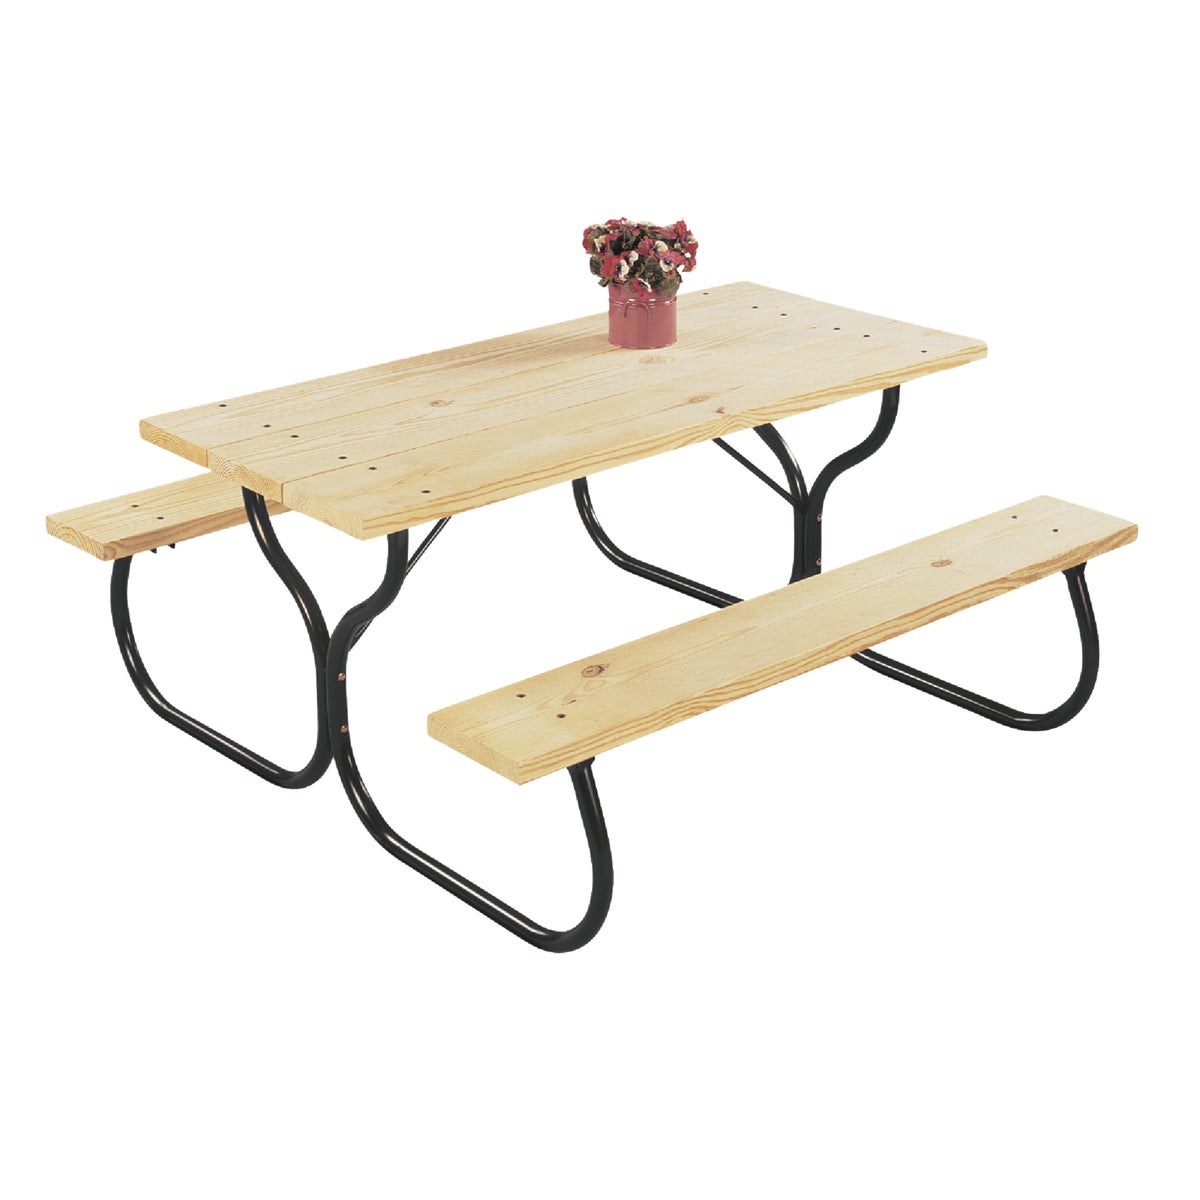 Item 820539, Crafted of heavy-duty powder coated steel tubing, this picnic table frame 